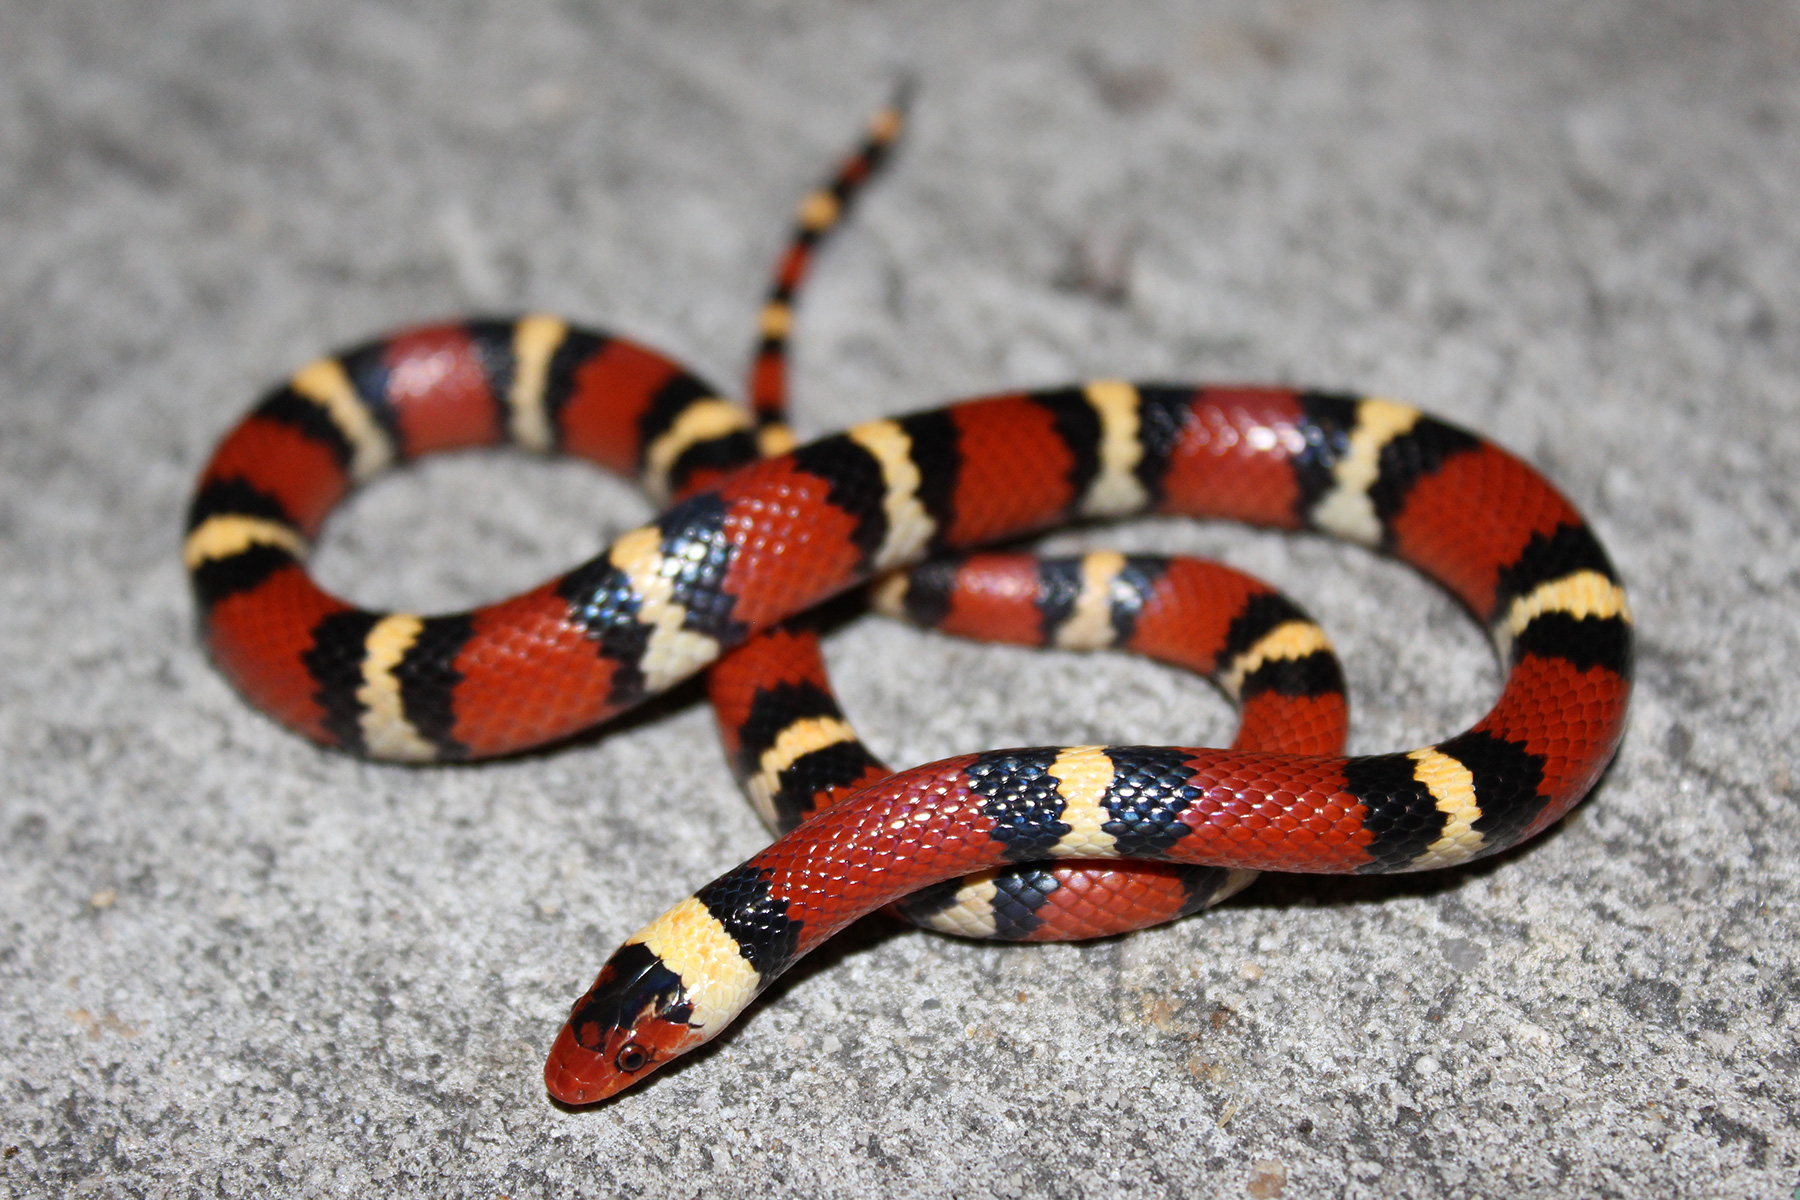 Details more than 123 black and yellow ringed snake - awesomeenglish.edu.vn